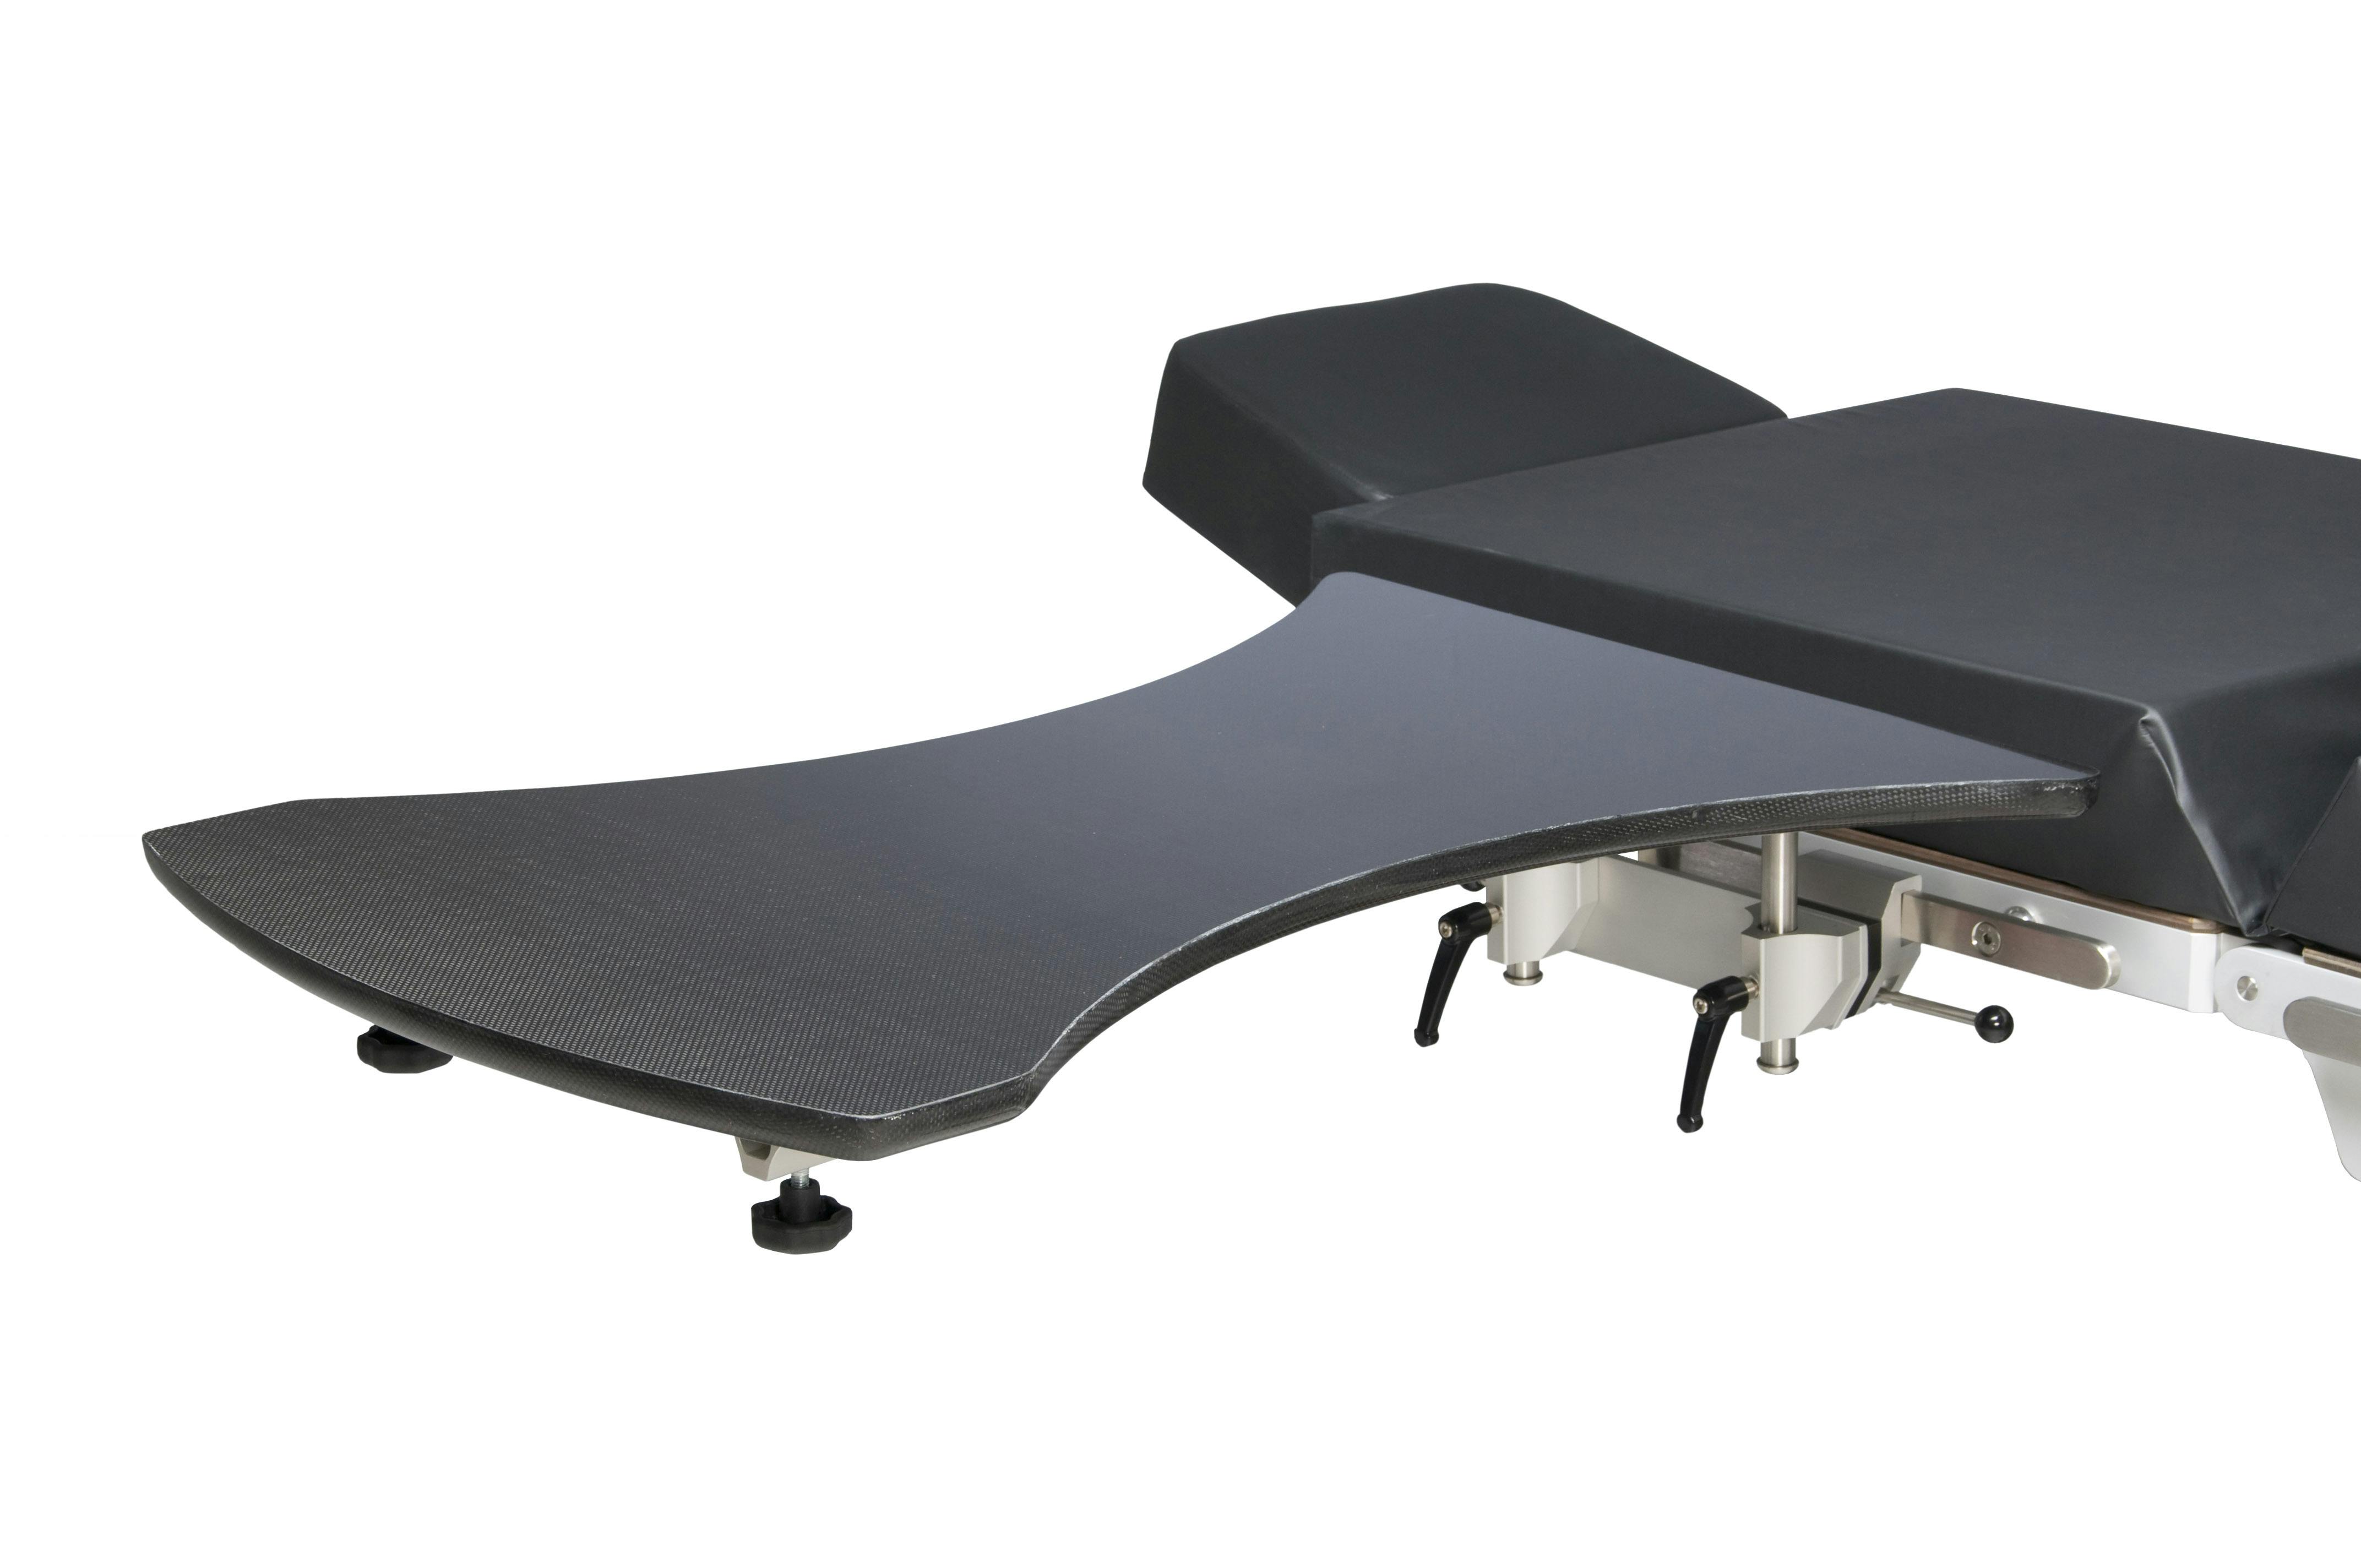 Arm & Hand Surgery Table - Carbon Fibre (10-396) - Hourglass - with Twin Hook-on Clamps - includes Pad - L820 x W525 x H720 to 1150mm